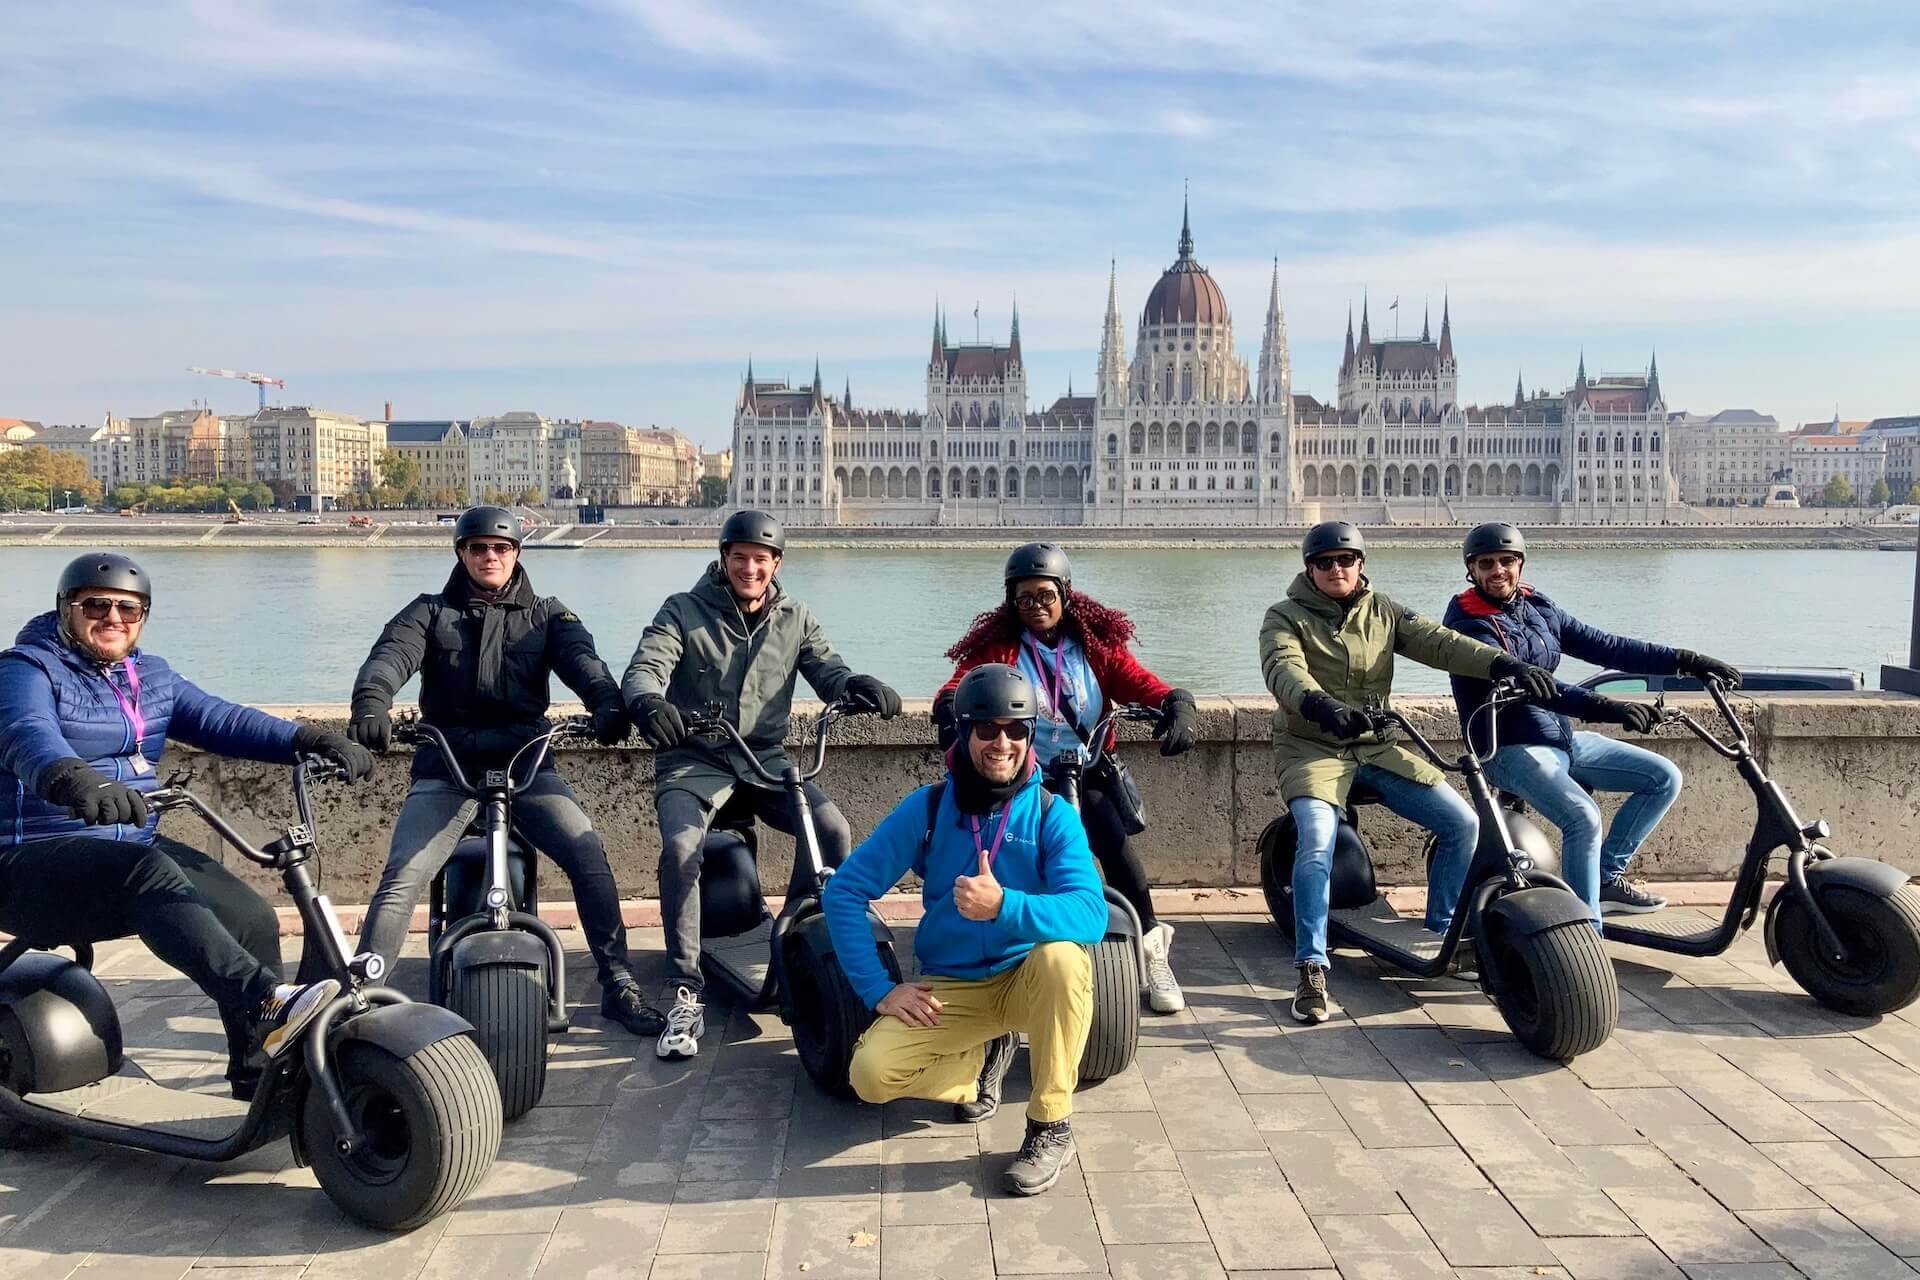 People on an e-scooter tour posing with the Parliament in the background.